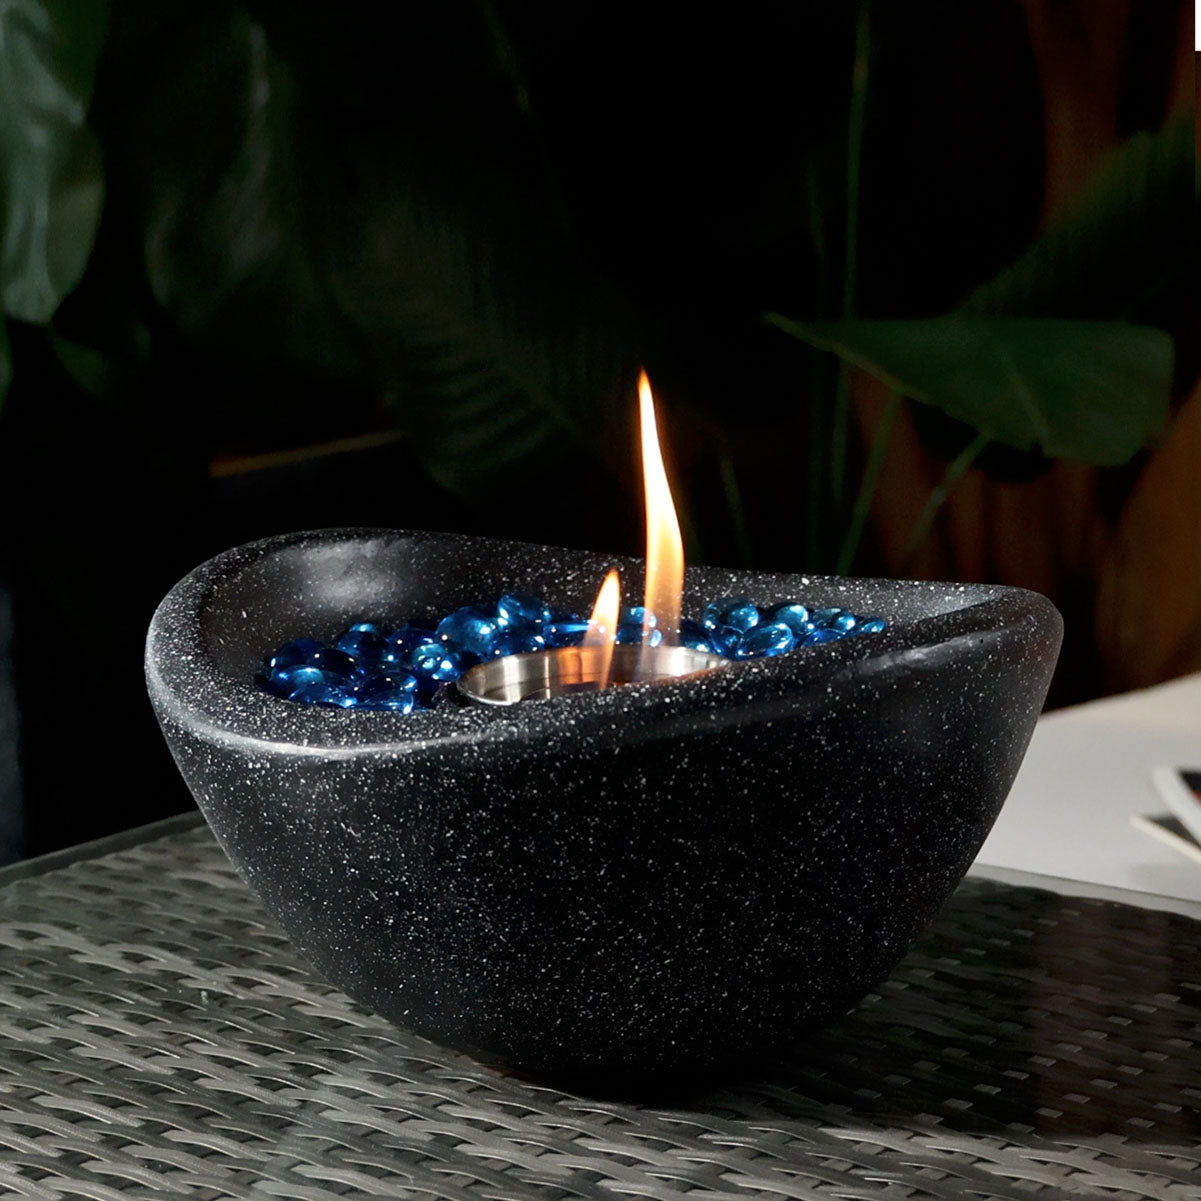 Concrete Tabletop Fire Pit Bowl - Ethanol/Gel Fueled Portable Stainless Steel Fire Pit with lid